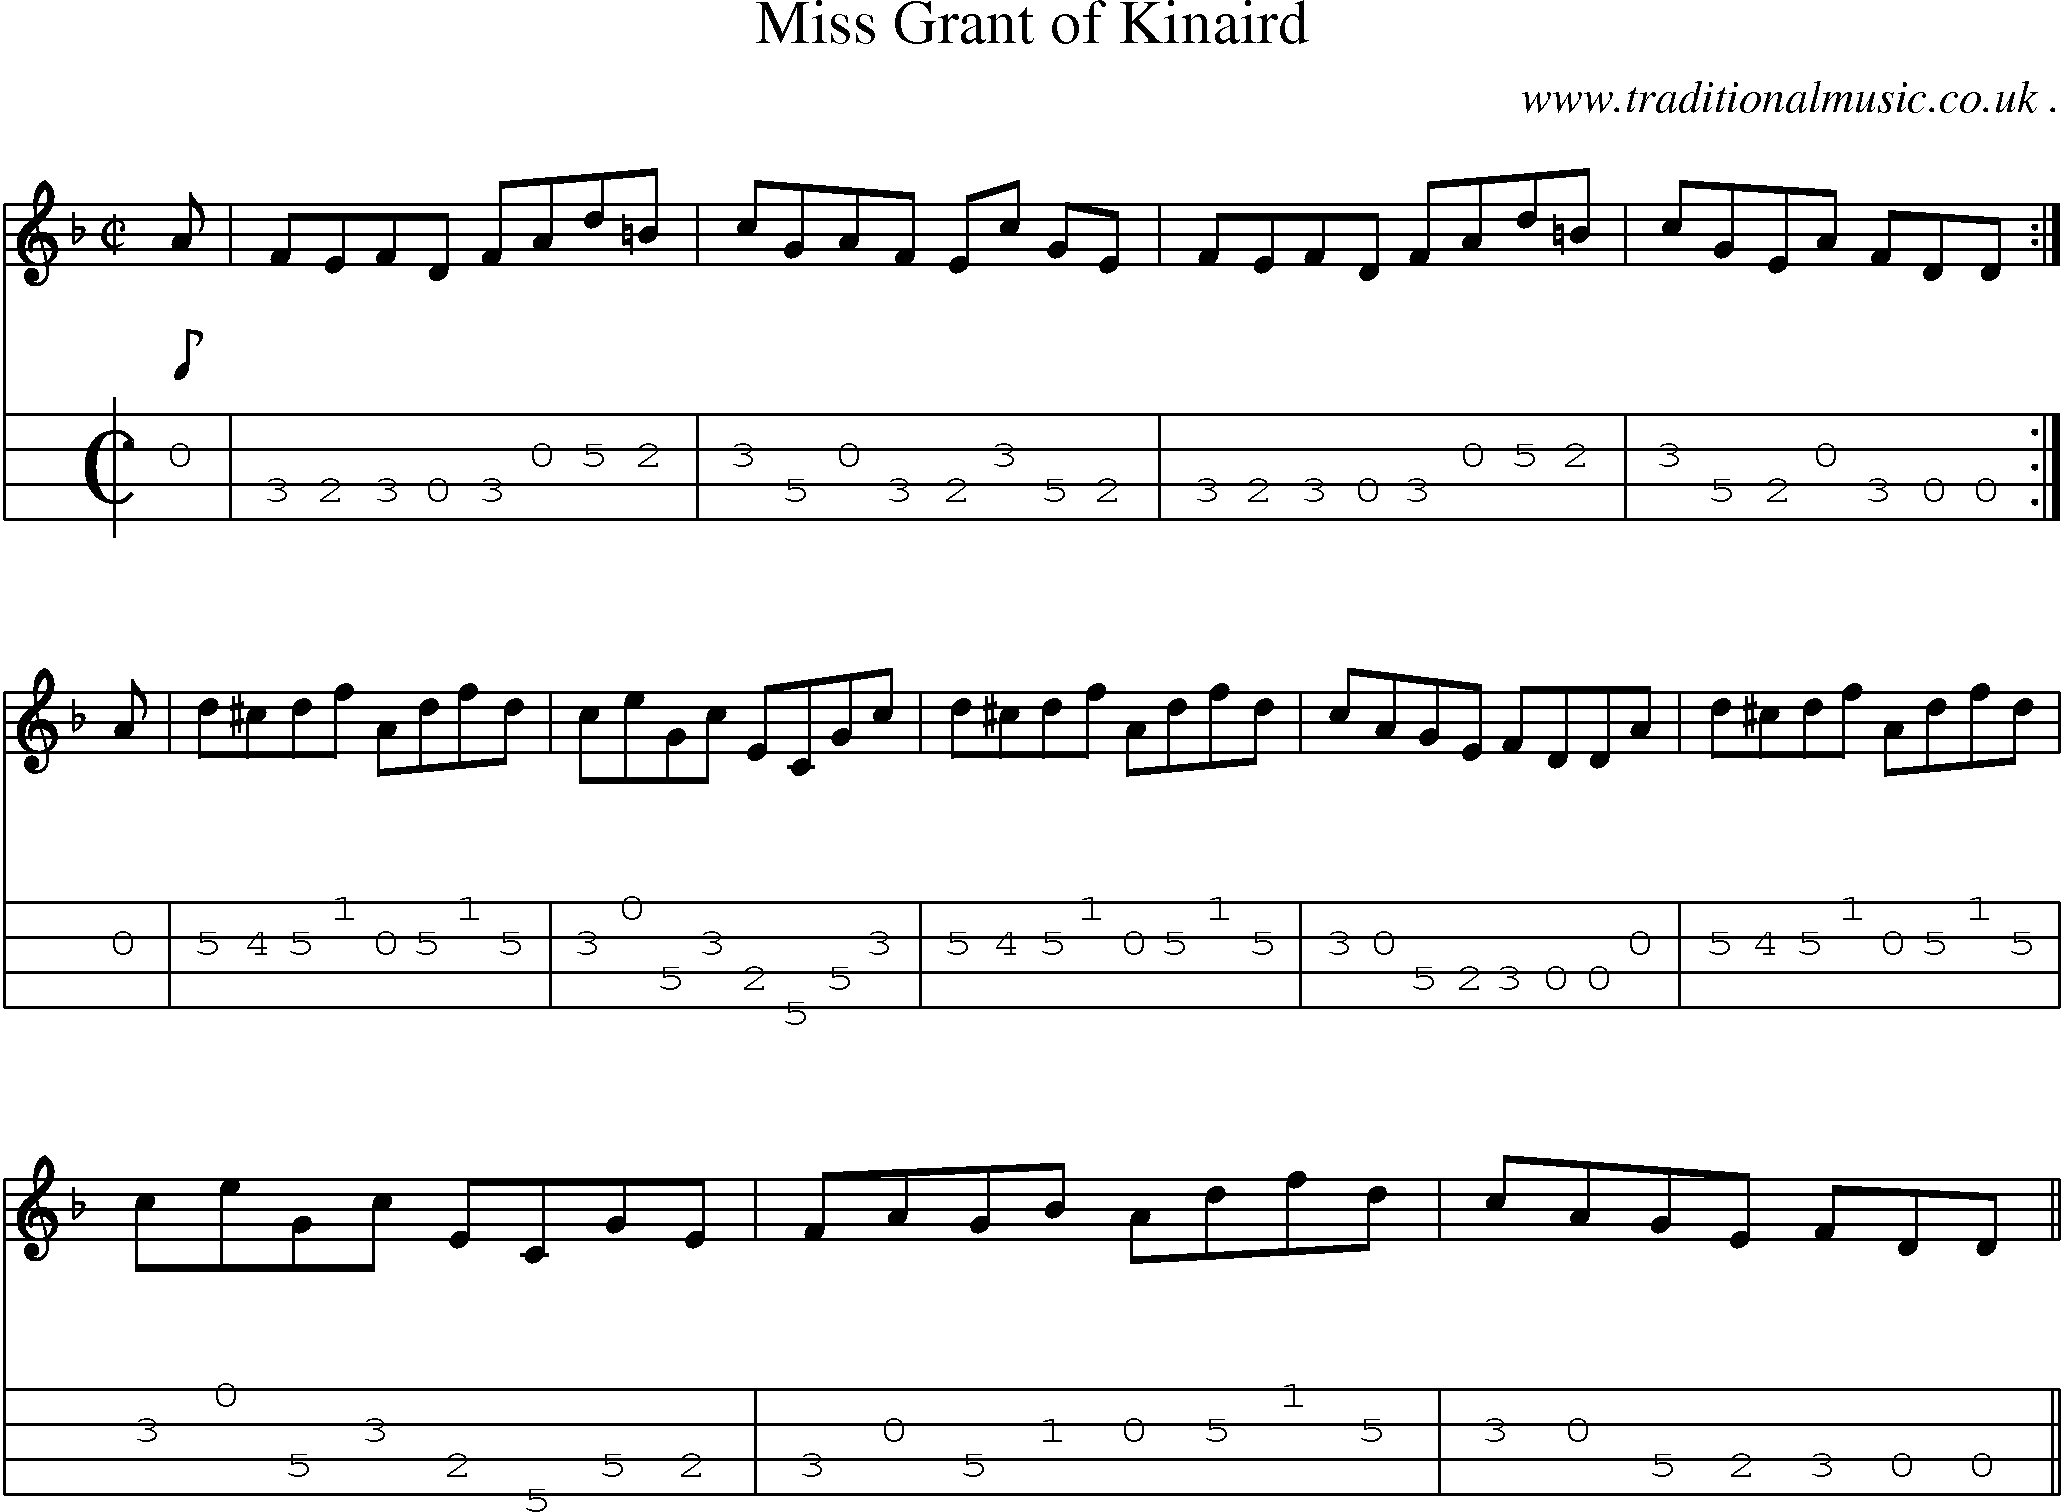 Sheet-music  score, Chords and Mandolin Tabs for Miss Grant Of Kinaird